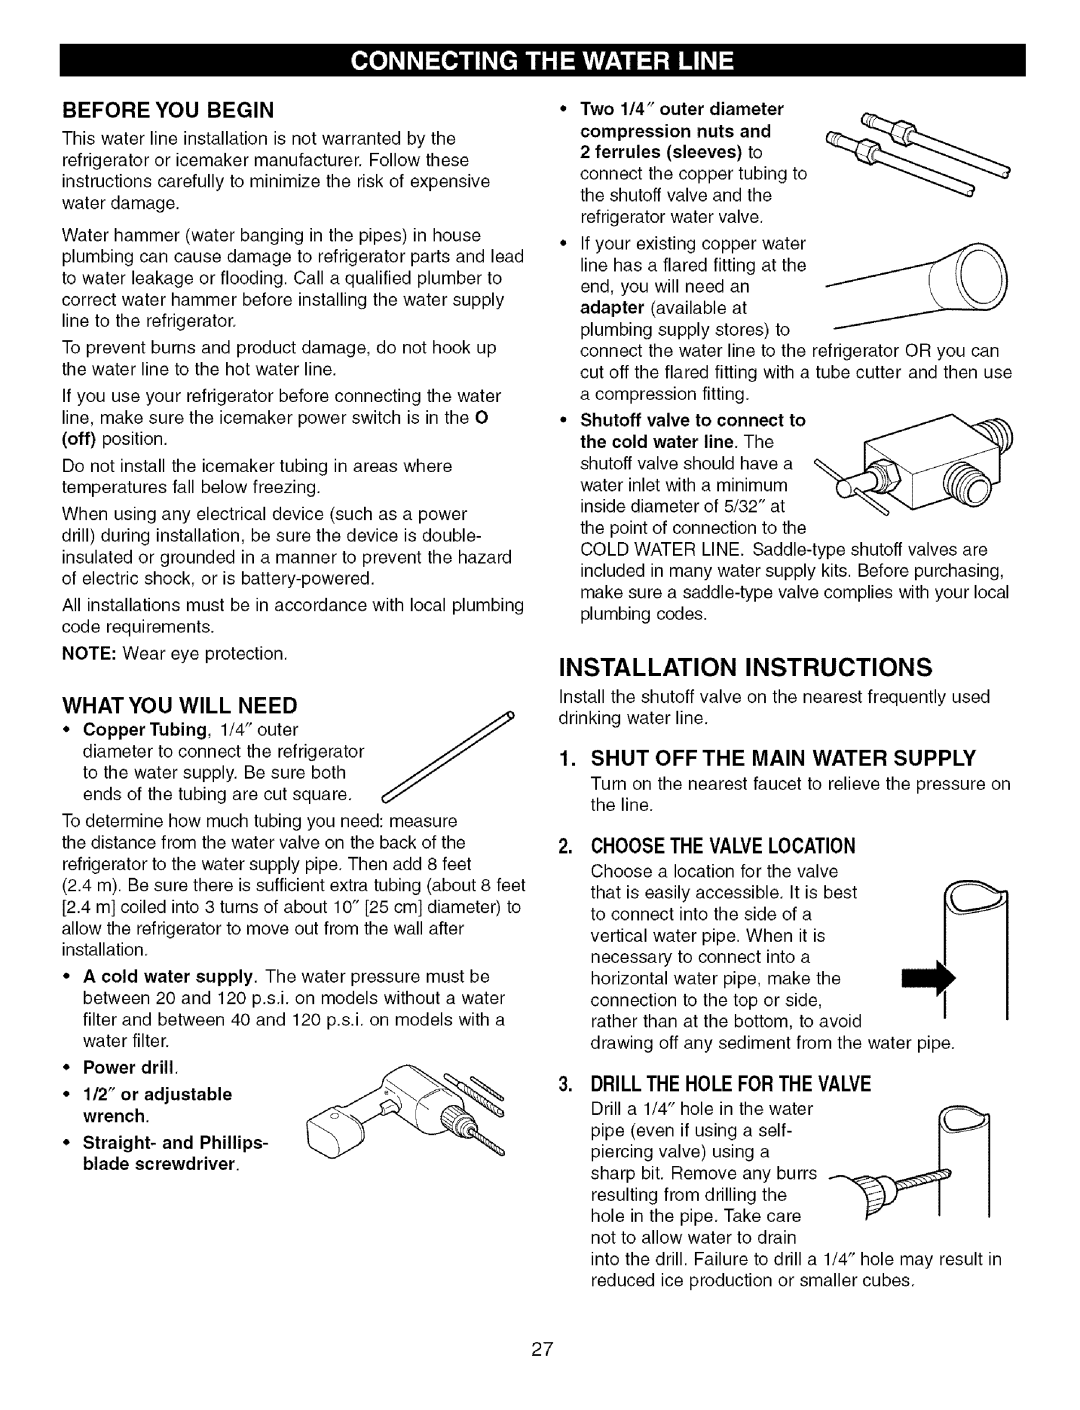 Kenmore 79575559400 Installation Instructions, What You Will Need, Shut Off The Main Water Supply, Drilltheholeforthevalve 